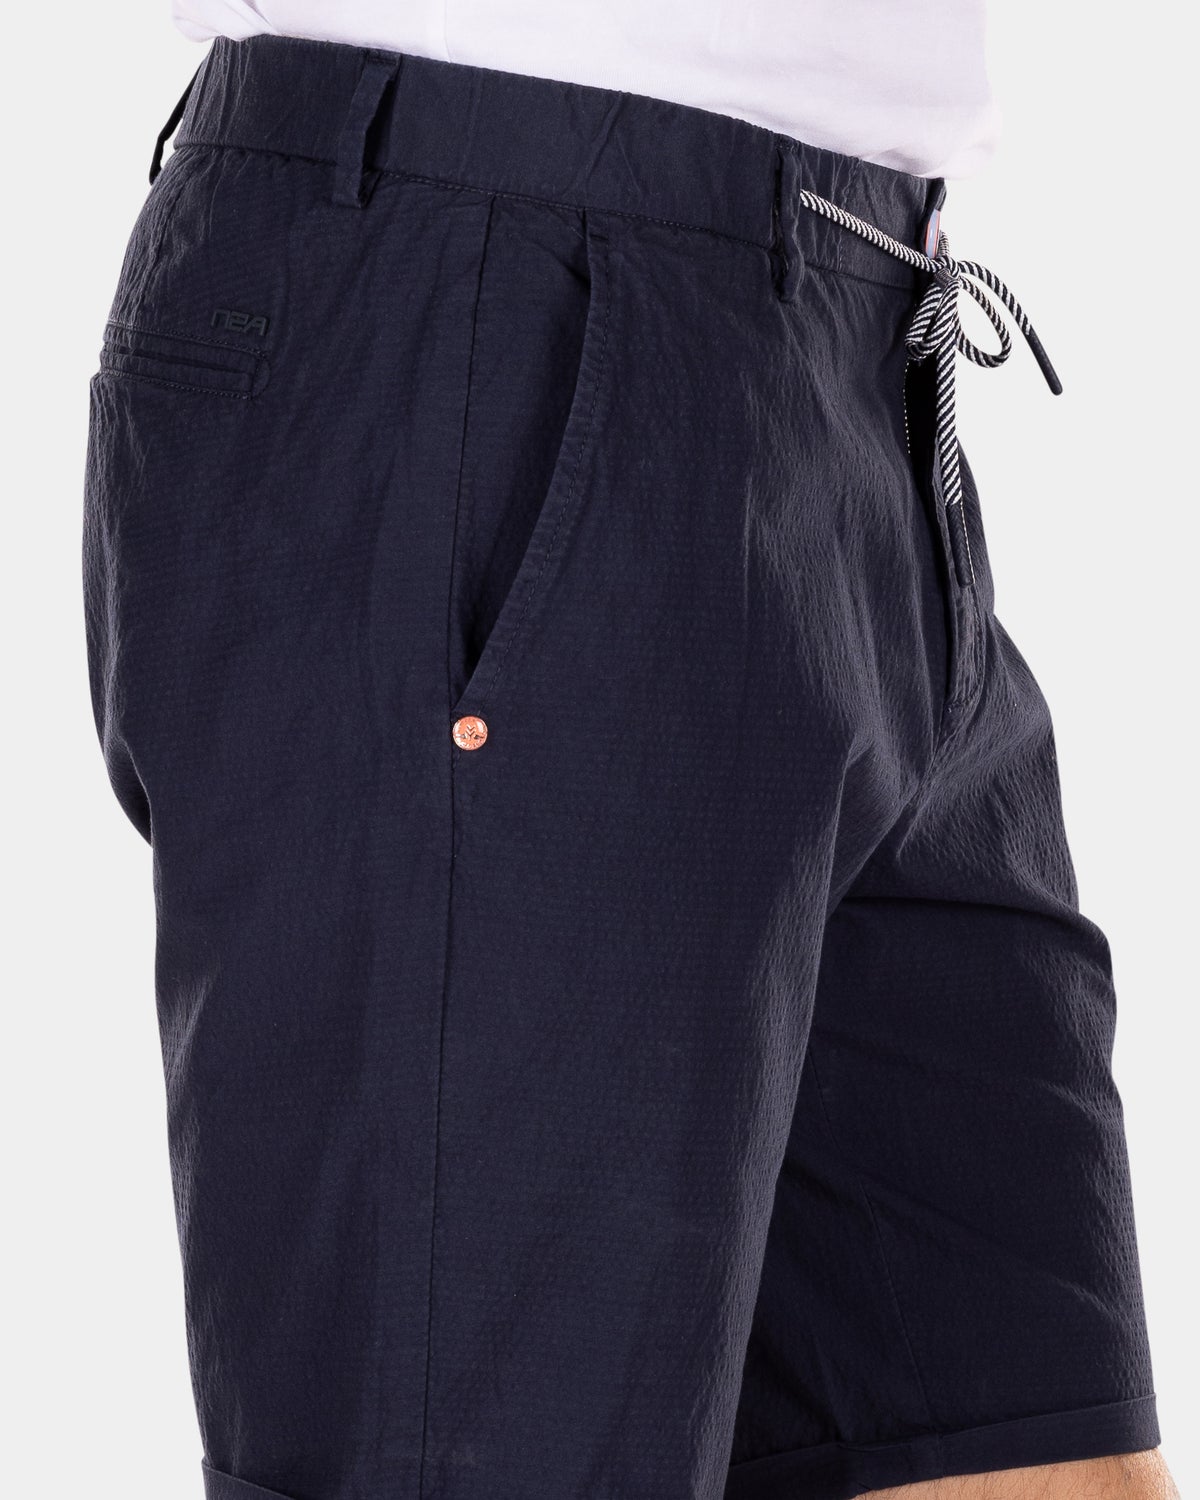 Short chinos made of cotton - Traditional Navy